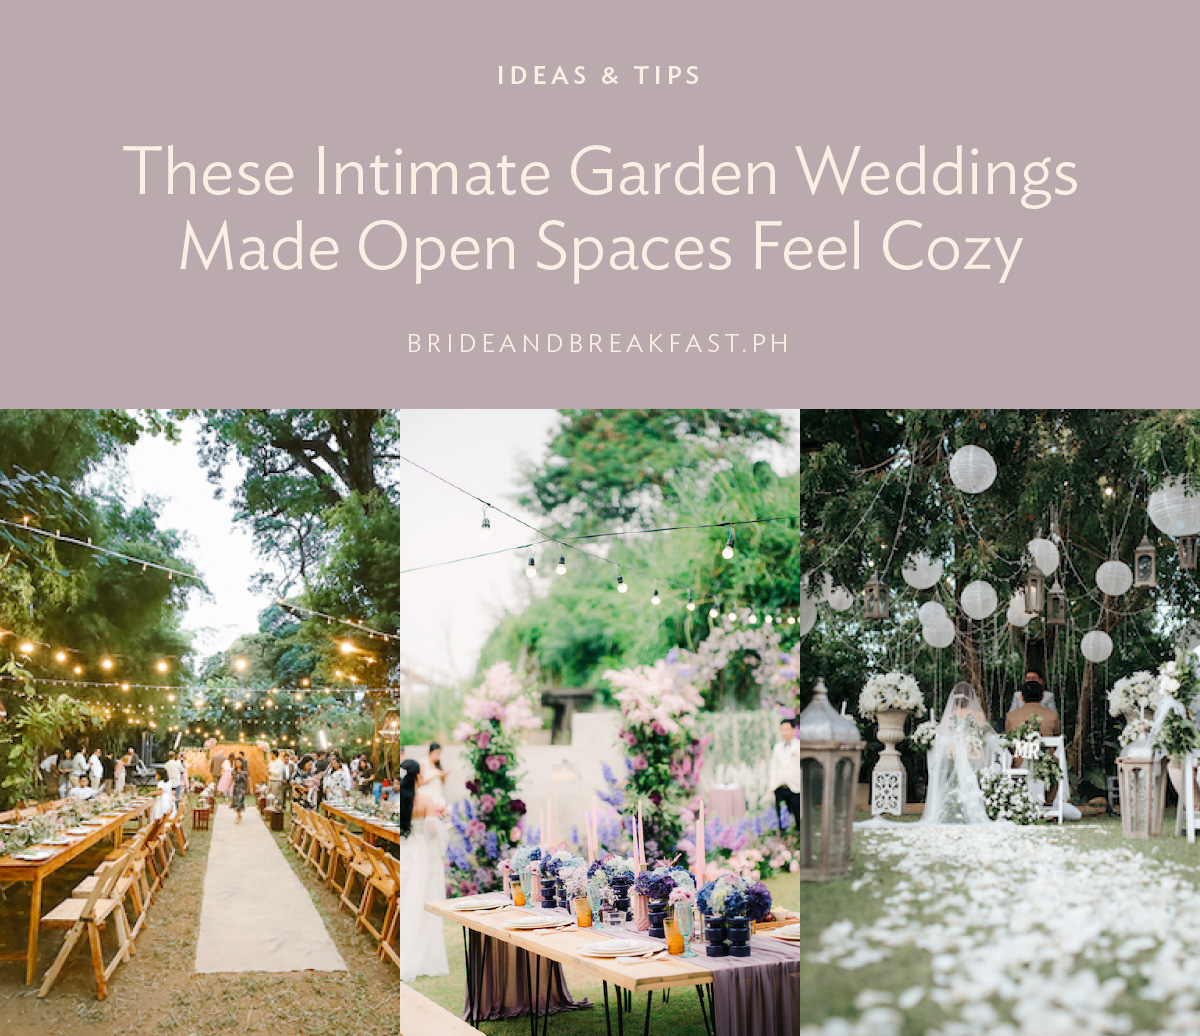 These Intimate Garden Weddings Made Open Spaces Feel Cozy